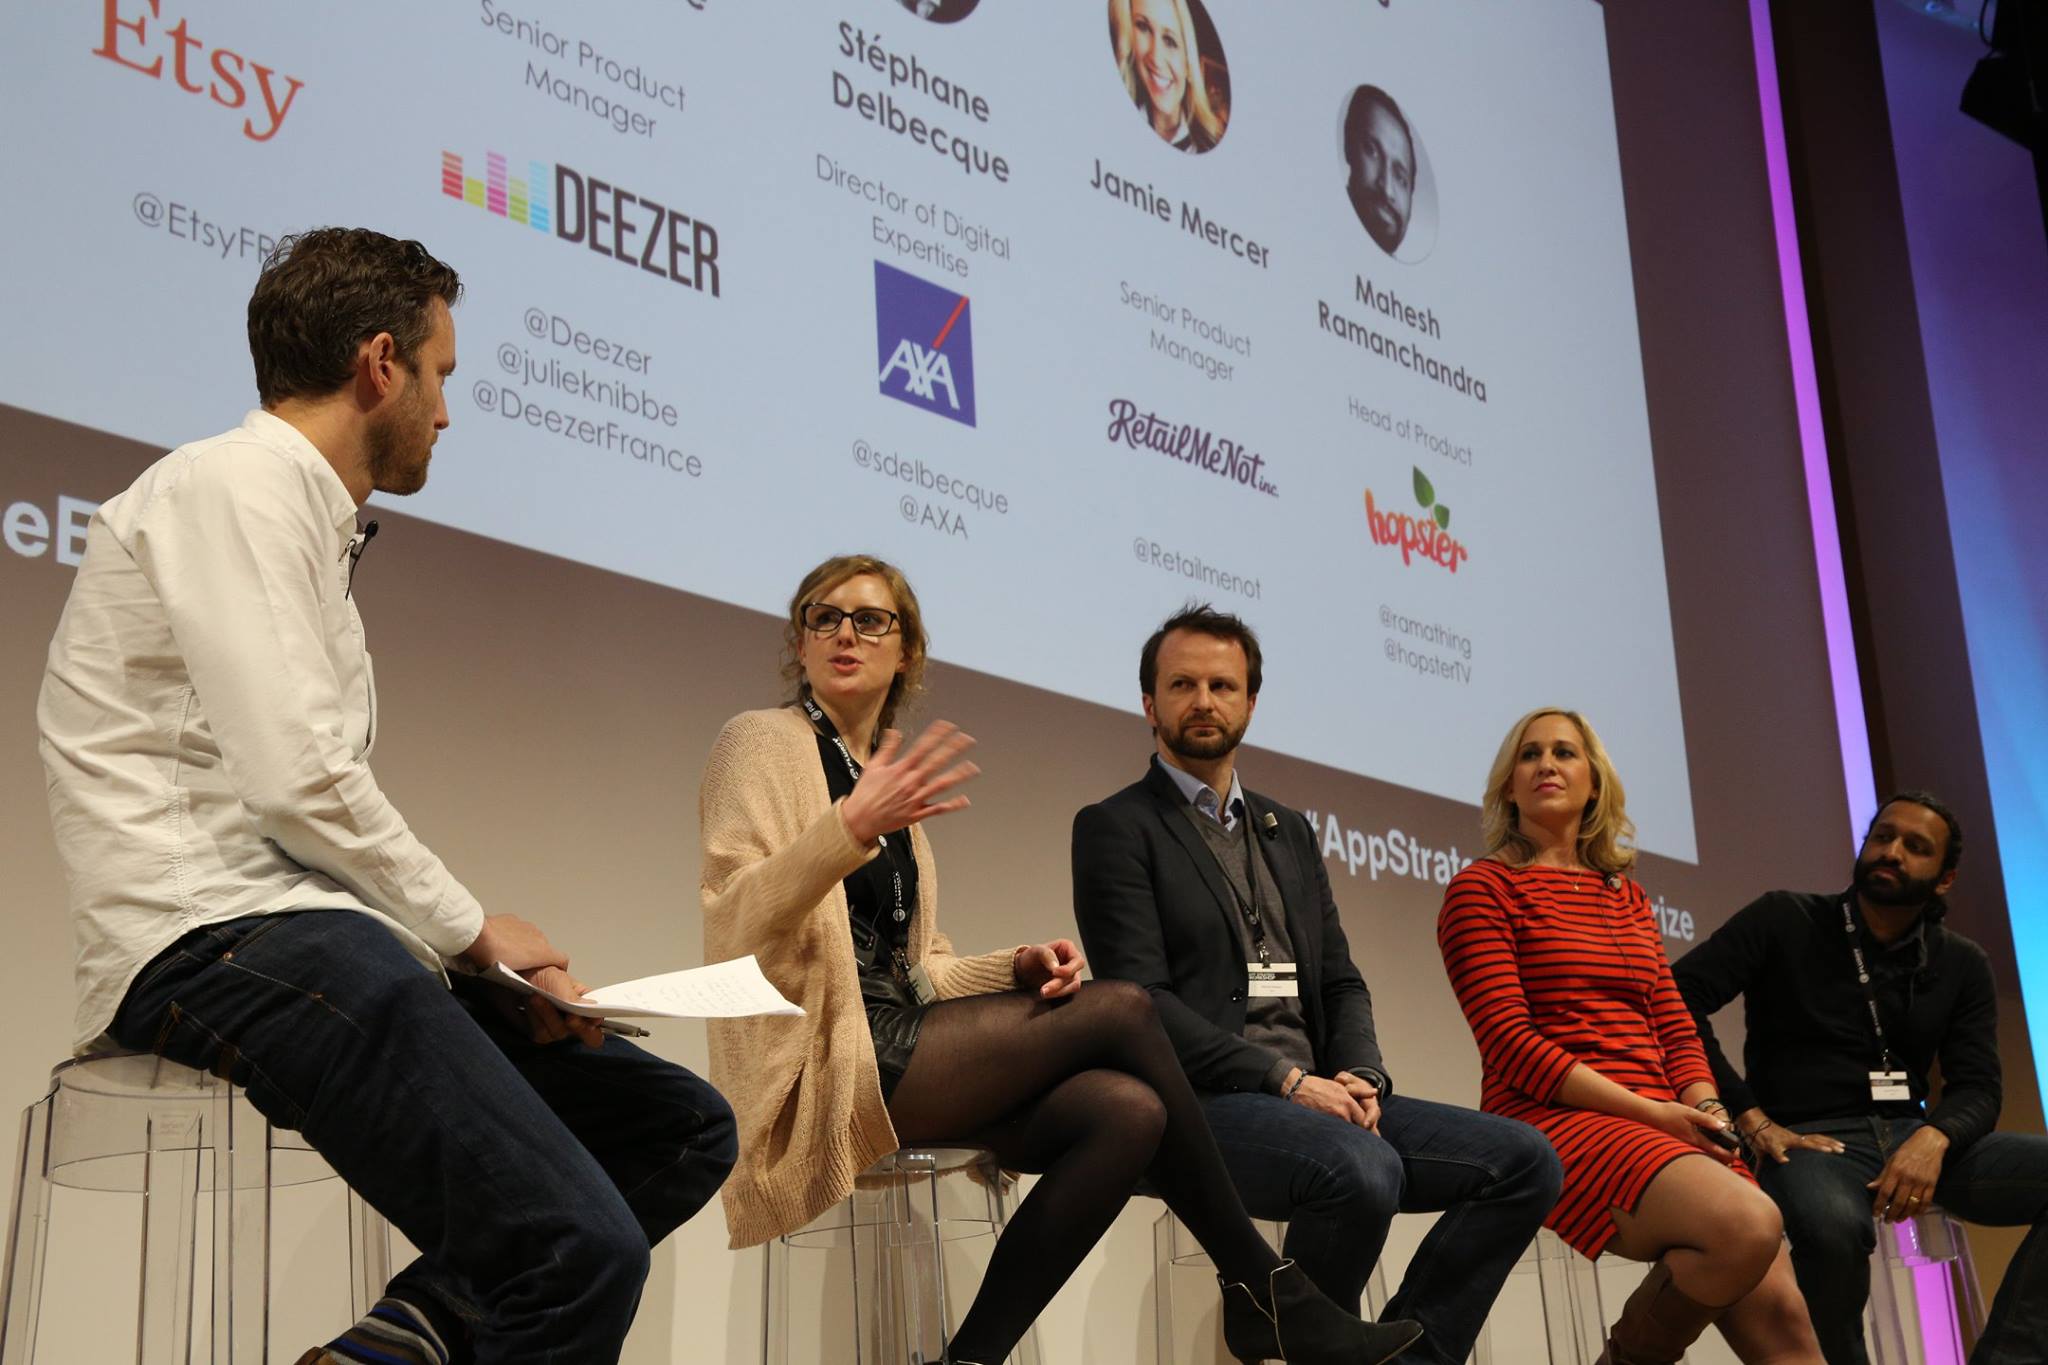 Rich Brown, UX Lead from Etsy was the moderator of a panel including the following speakers:&nbsp;Mahesh Ramanchandra, Head of Product, Hopster,&nbsp;Stephane Delbecque, Director of Digital Expertise, AXA,&nbsp;Jamie Mercer, Senior Product Manager, …